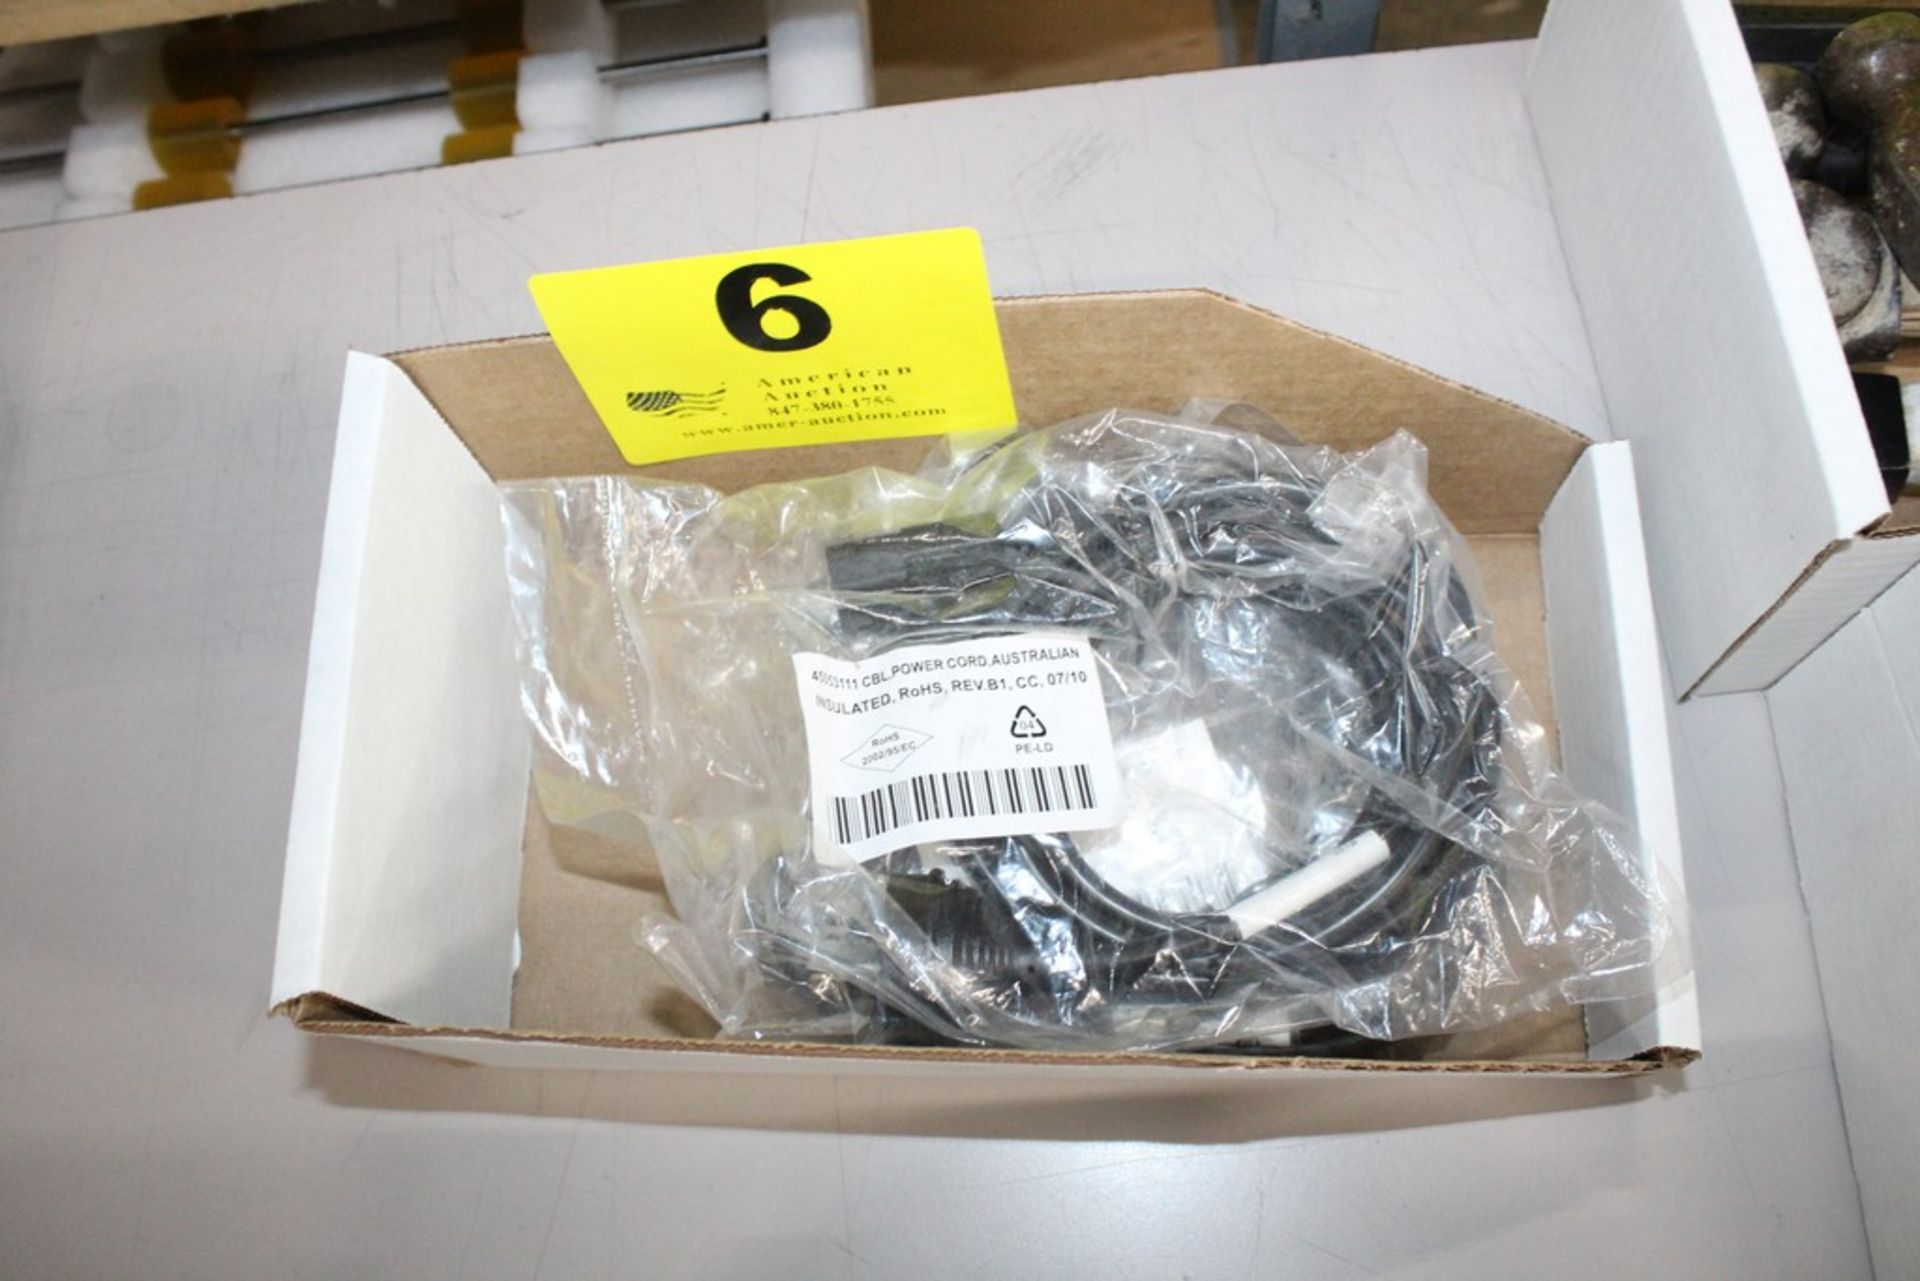 ASSORTED POWER CORDS IN BOX